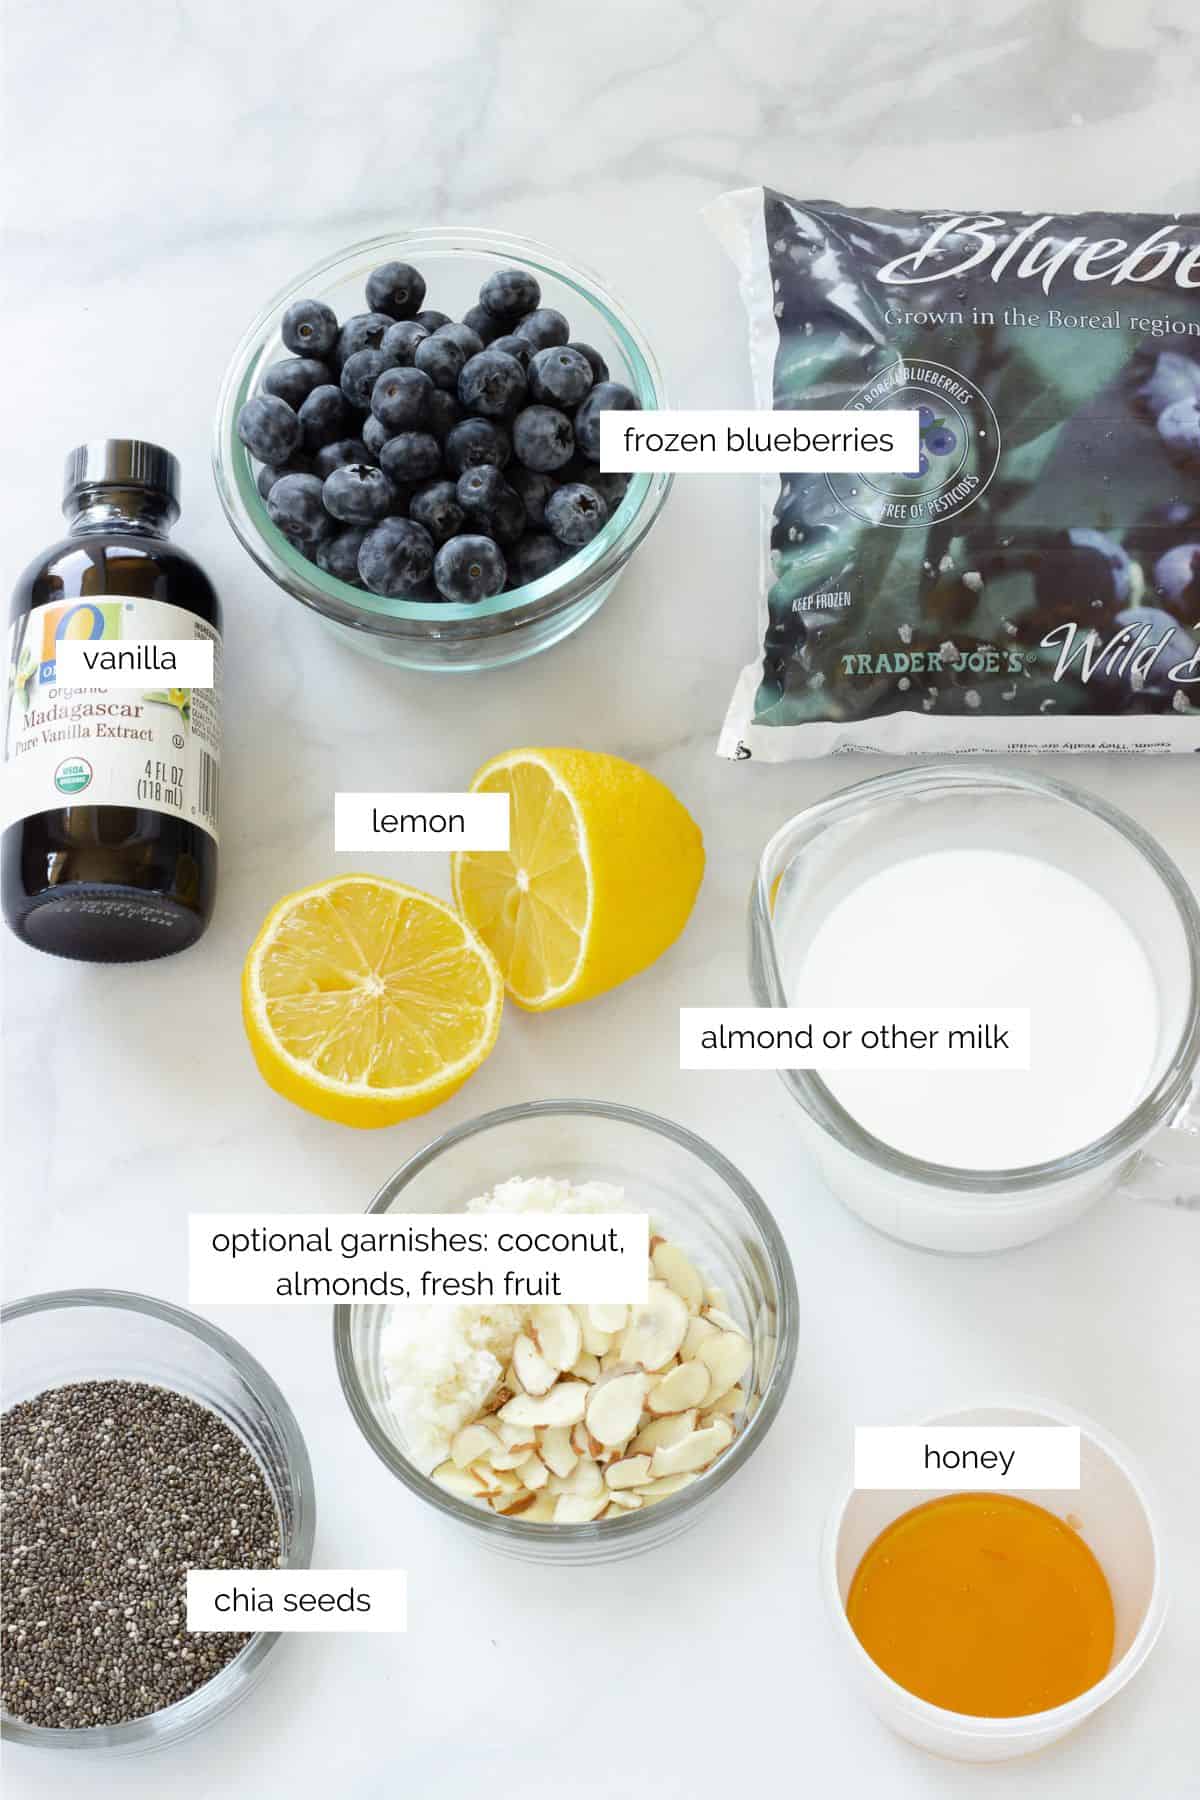 Ingredients to make Smooth & Creamy Blueberry Chia Pudding